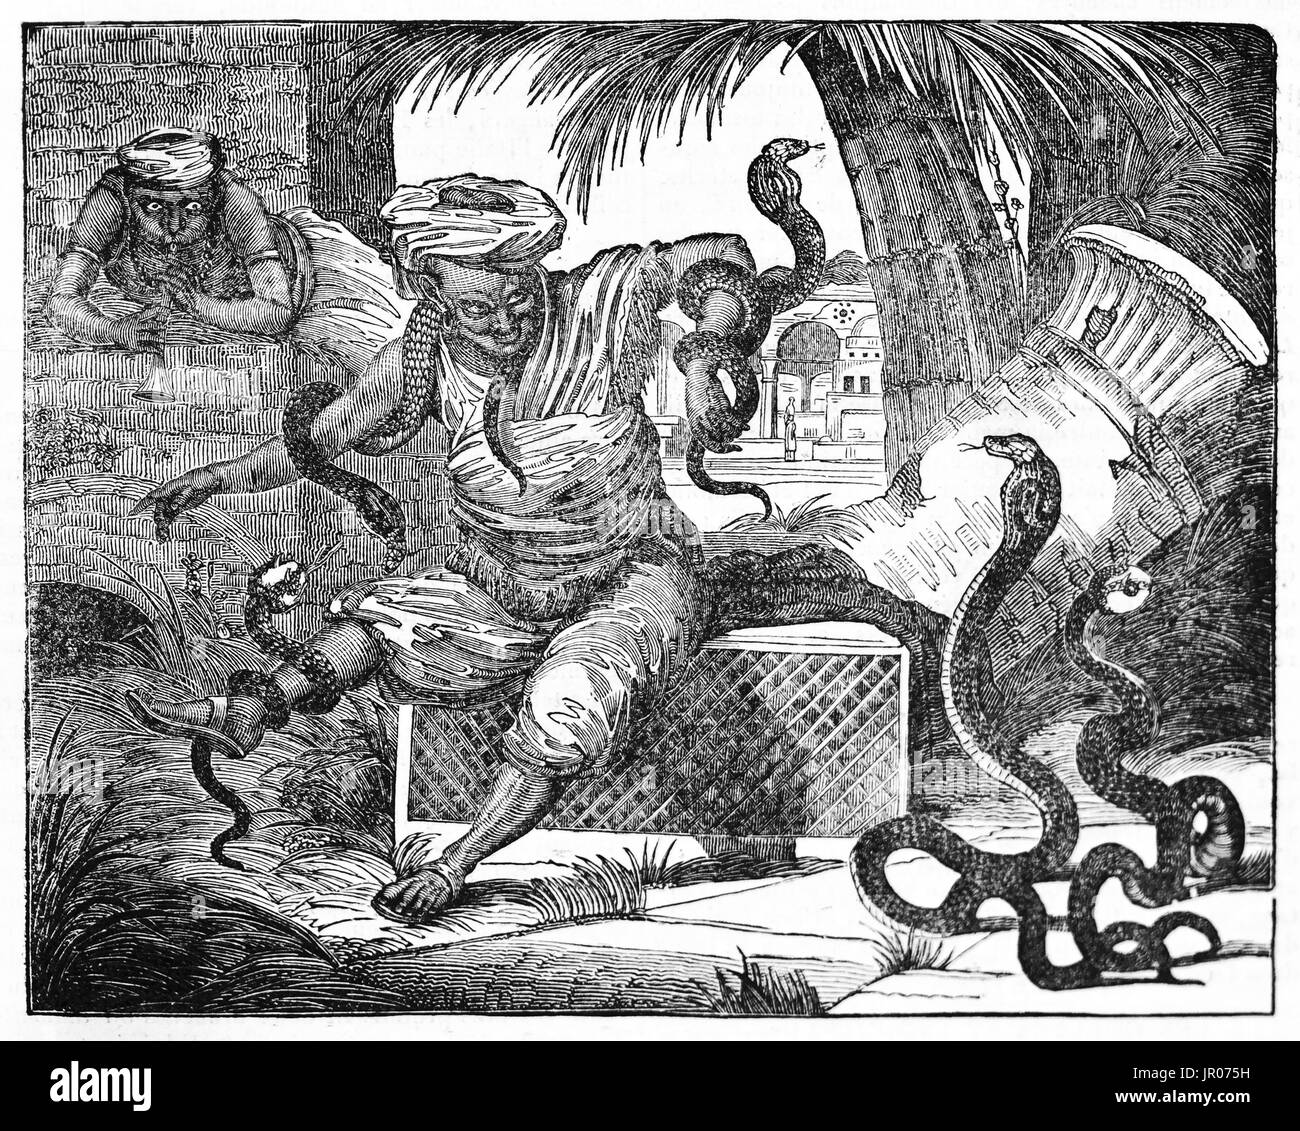 Old illustration of snake charmer. By unidentified author, published on Magasin Pittoresque, Paris, 1833. Stock Photo